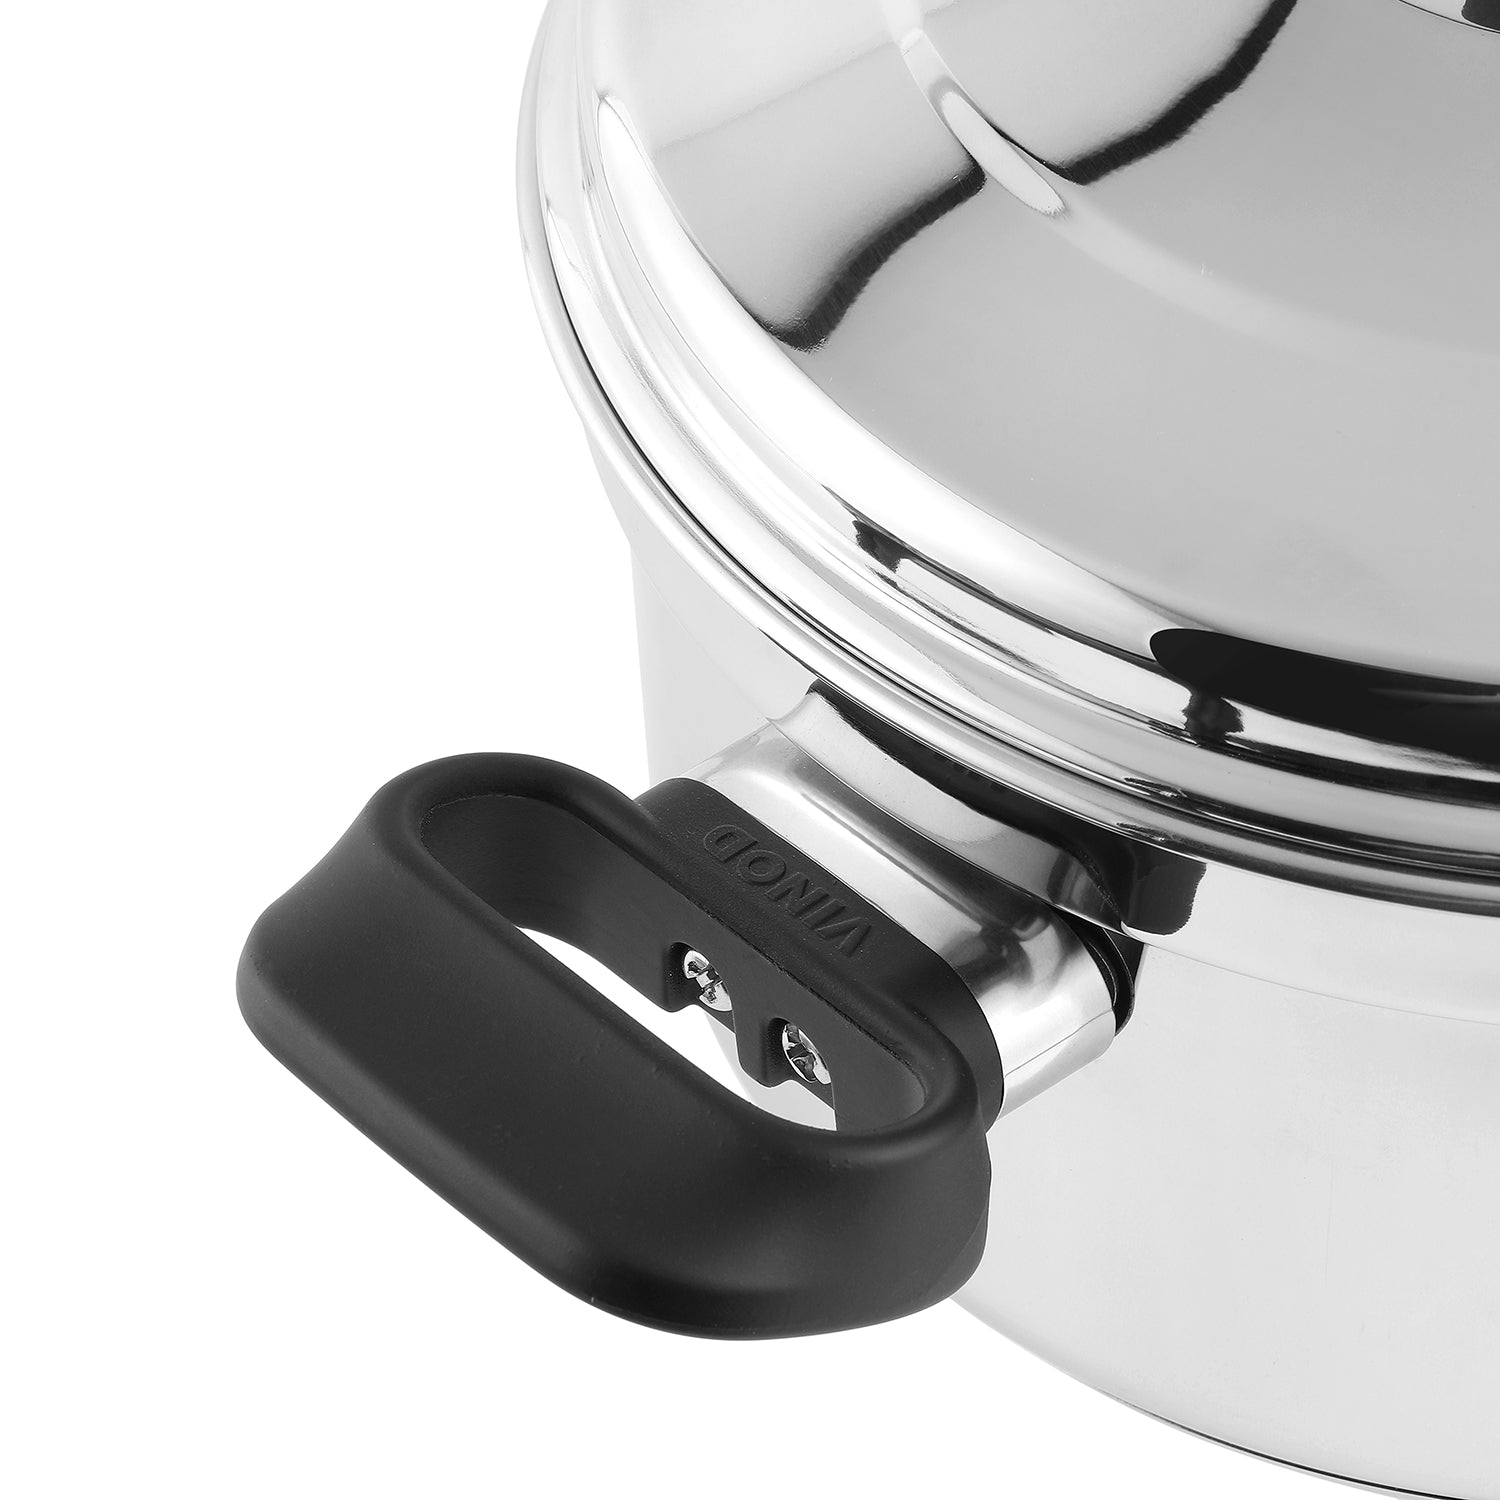 Vinod Stainless Steel Multi Pot (Induction Friendly)